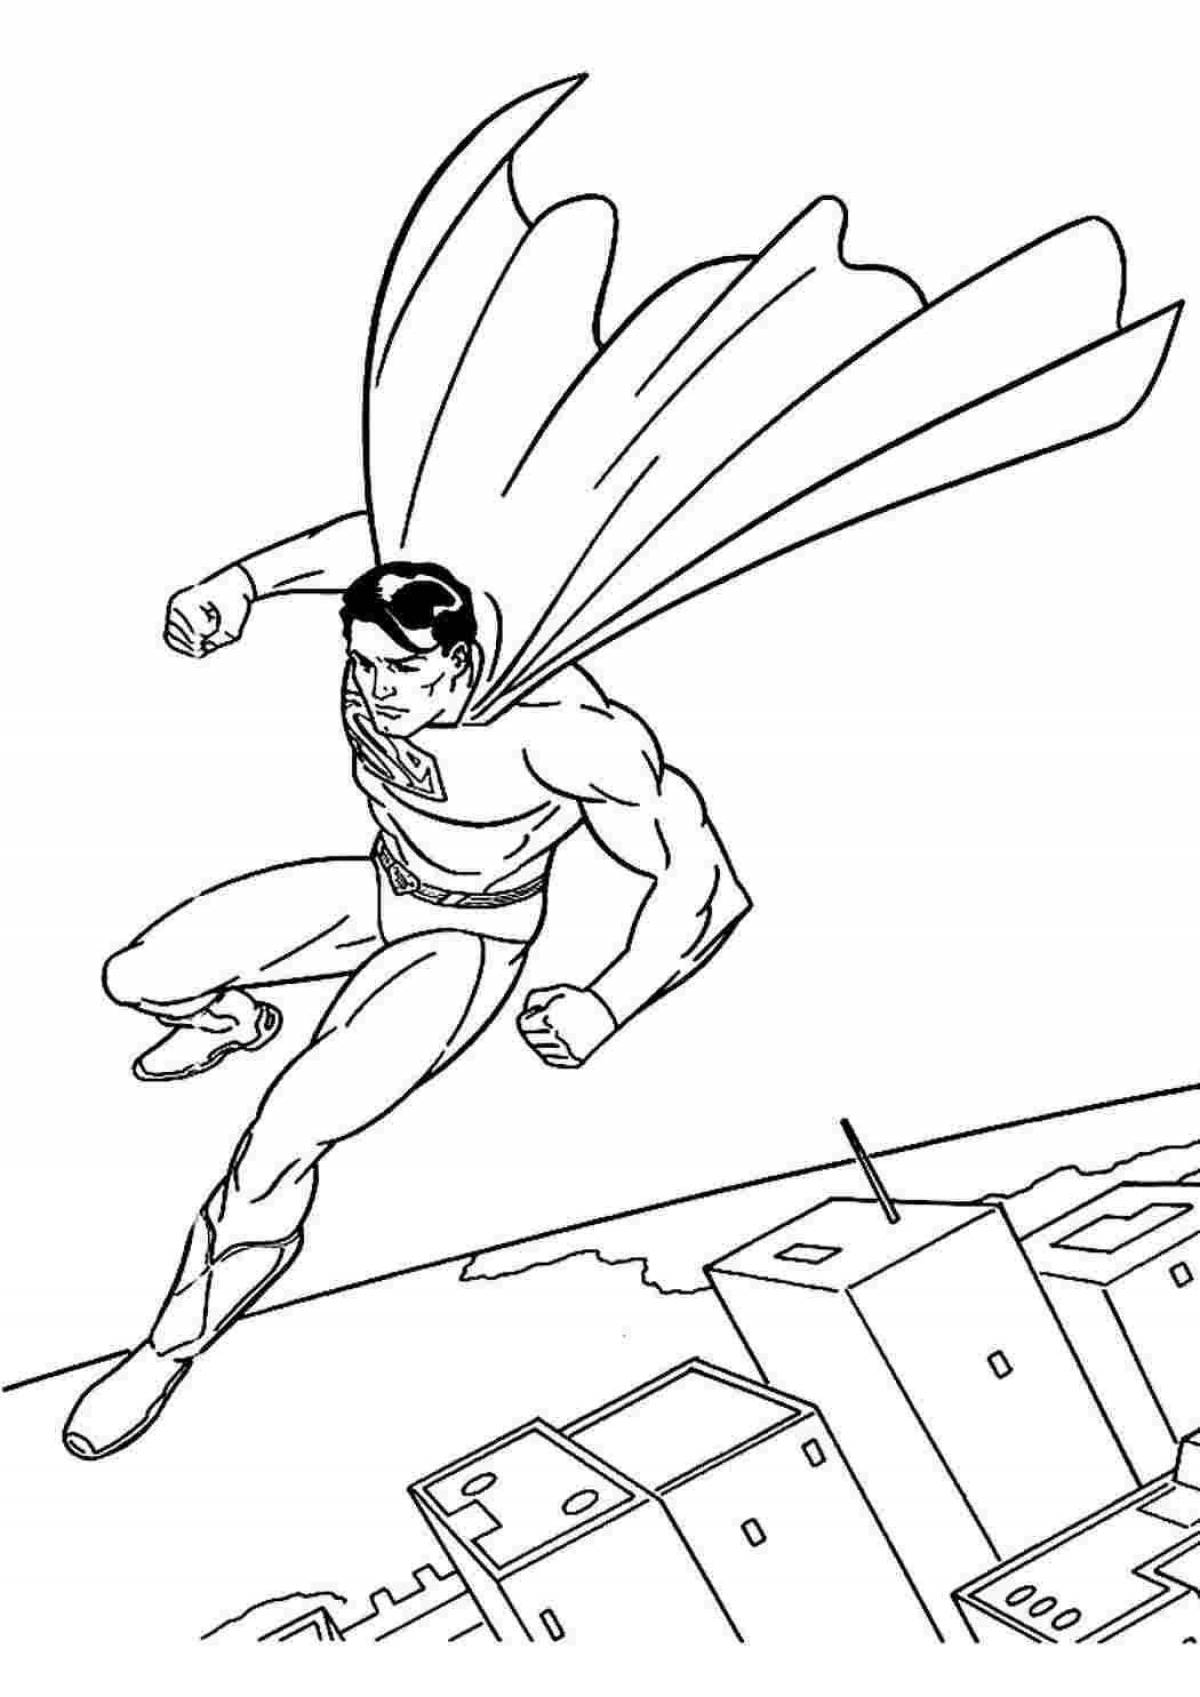 Heroic ace superhero coloring page